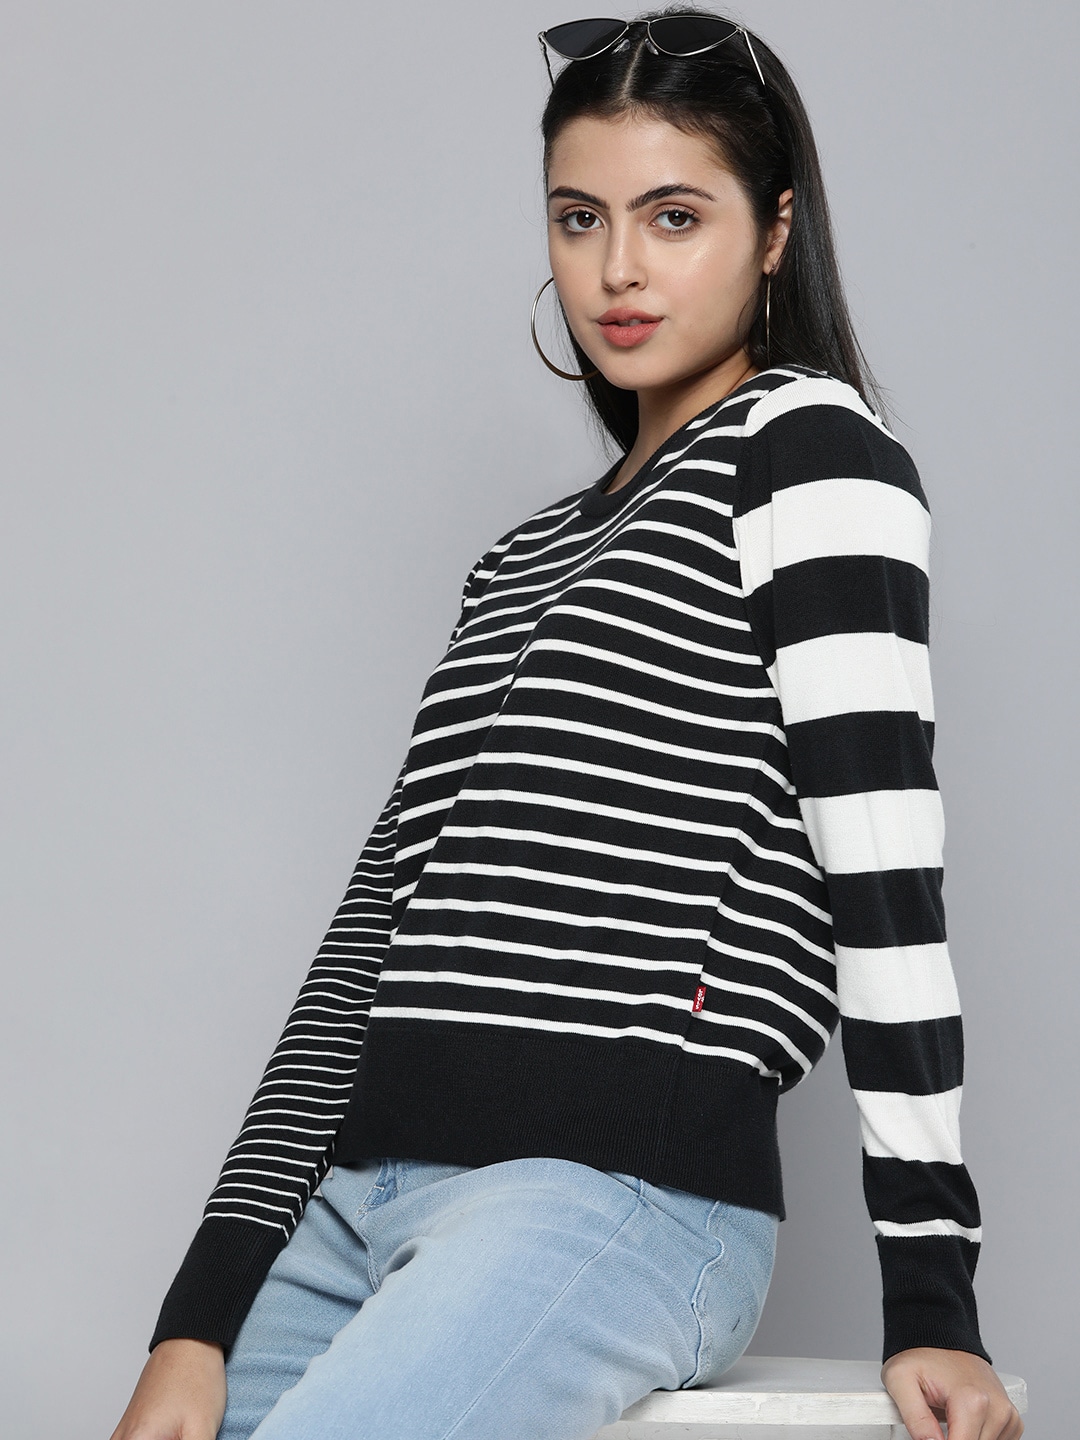 Levis Women Black & White Striped Pullover Sweater Price in India